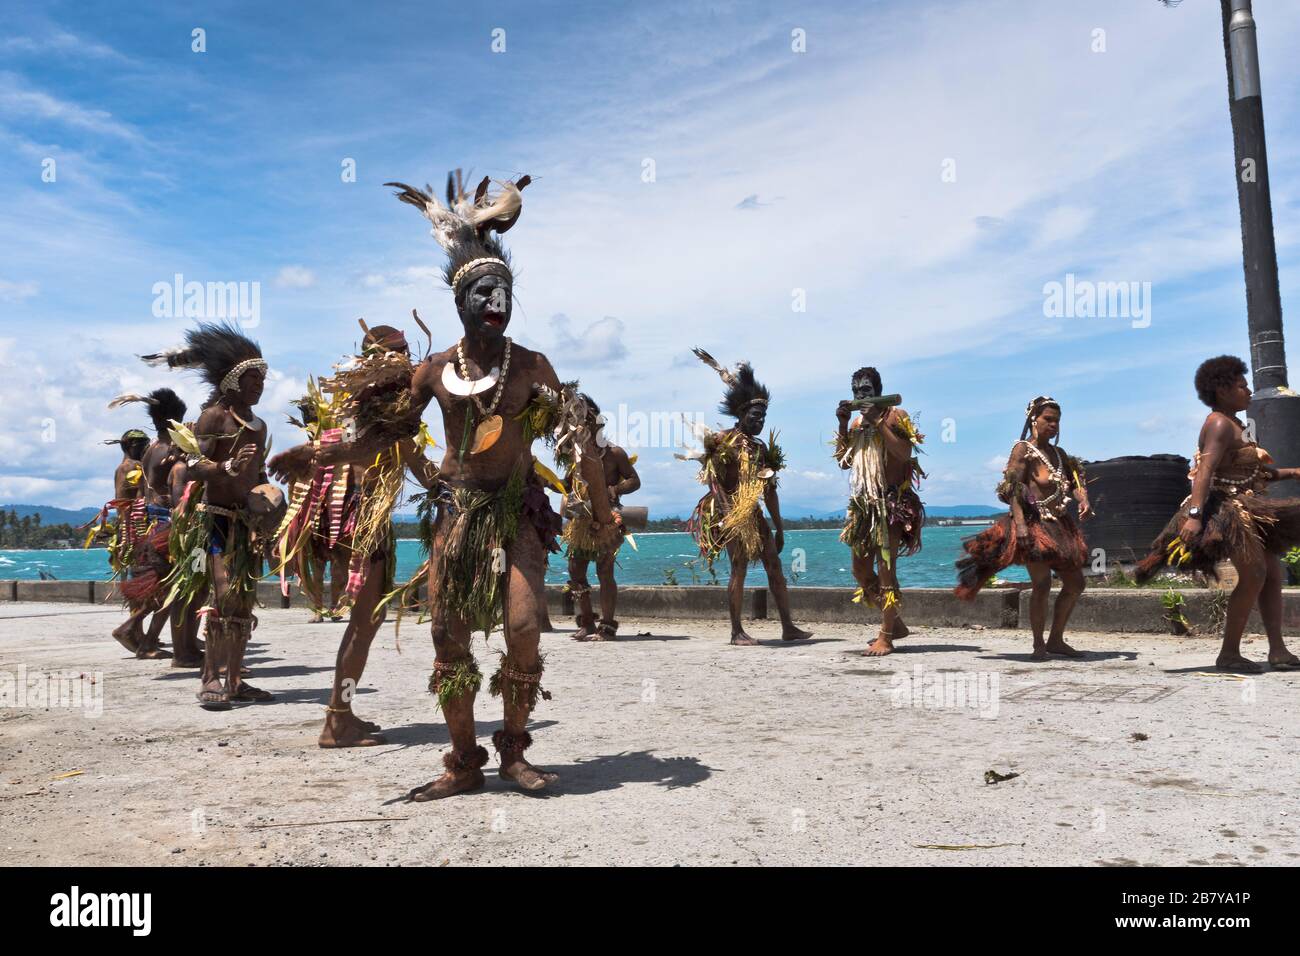 dh Port cruise ship welcome WEWAK PAPUA NEW GUINEA Traditional PNG native dancers welcoming visitors tourism people culture Stock Photo